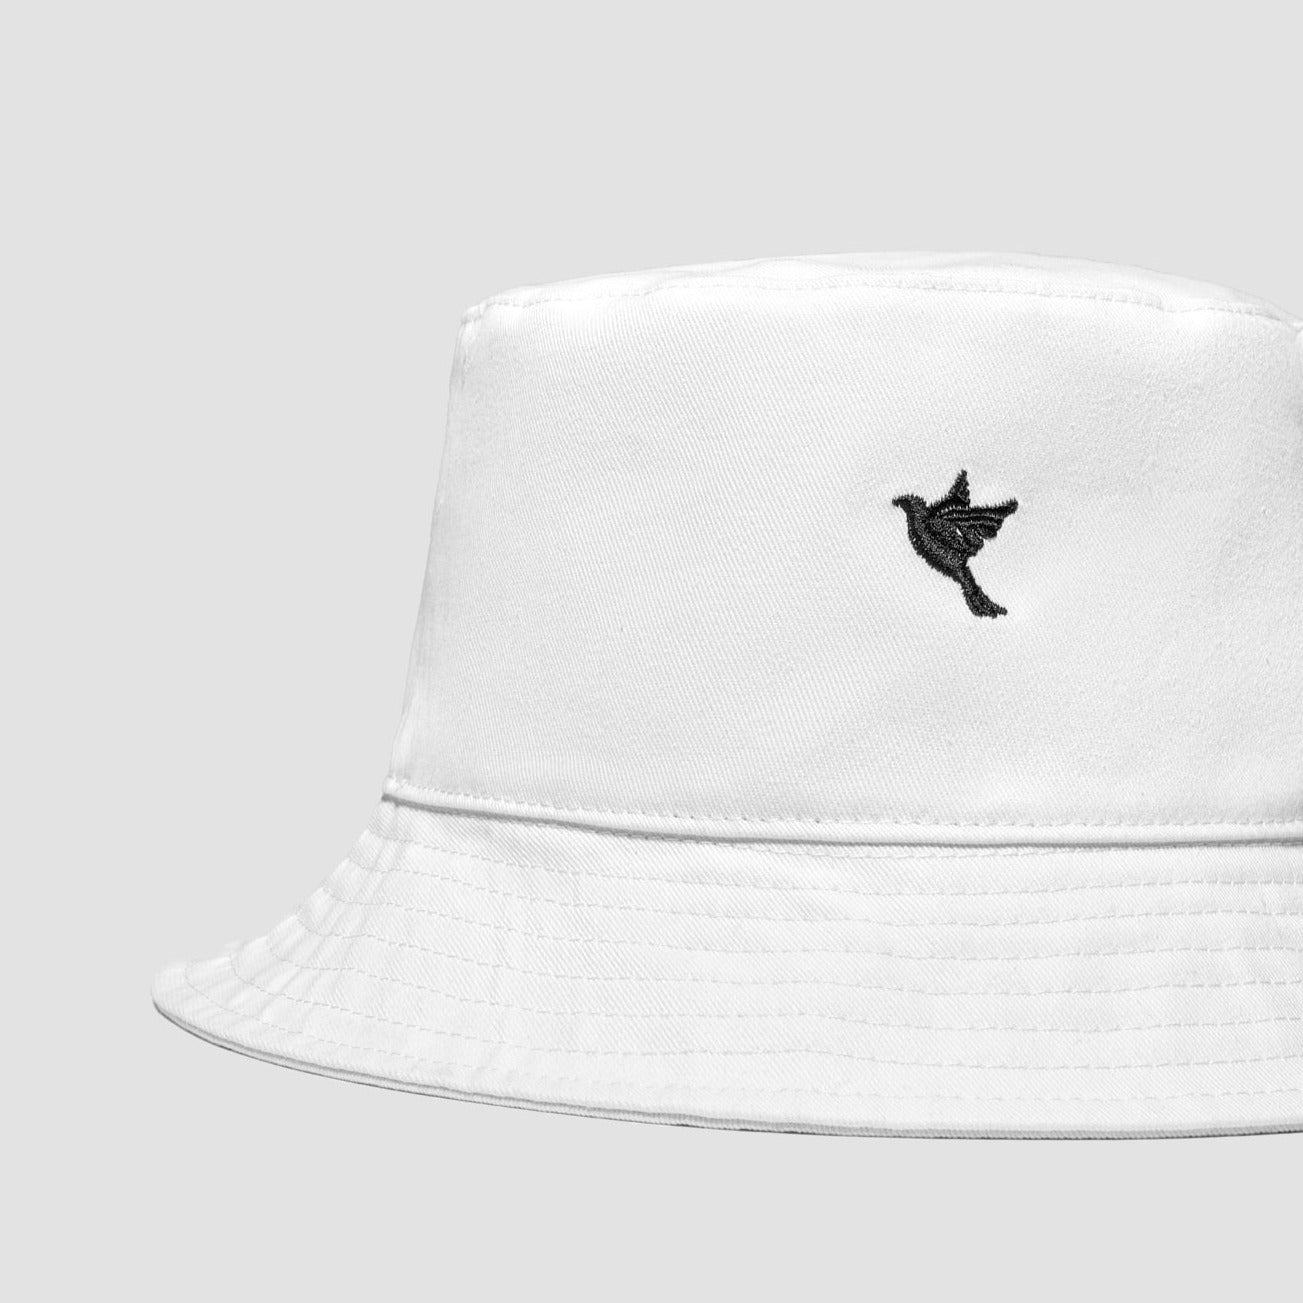 BY TPL ® Bucket Hat White [Navy Blue Dove] - The Proper Label ™